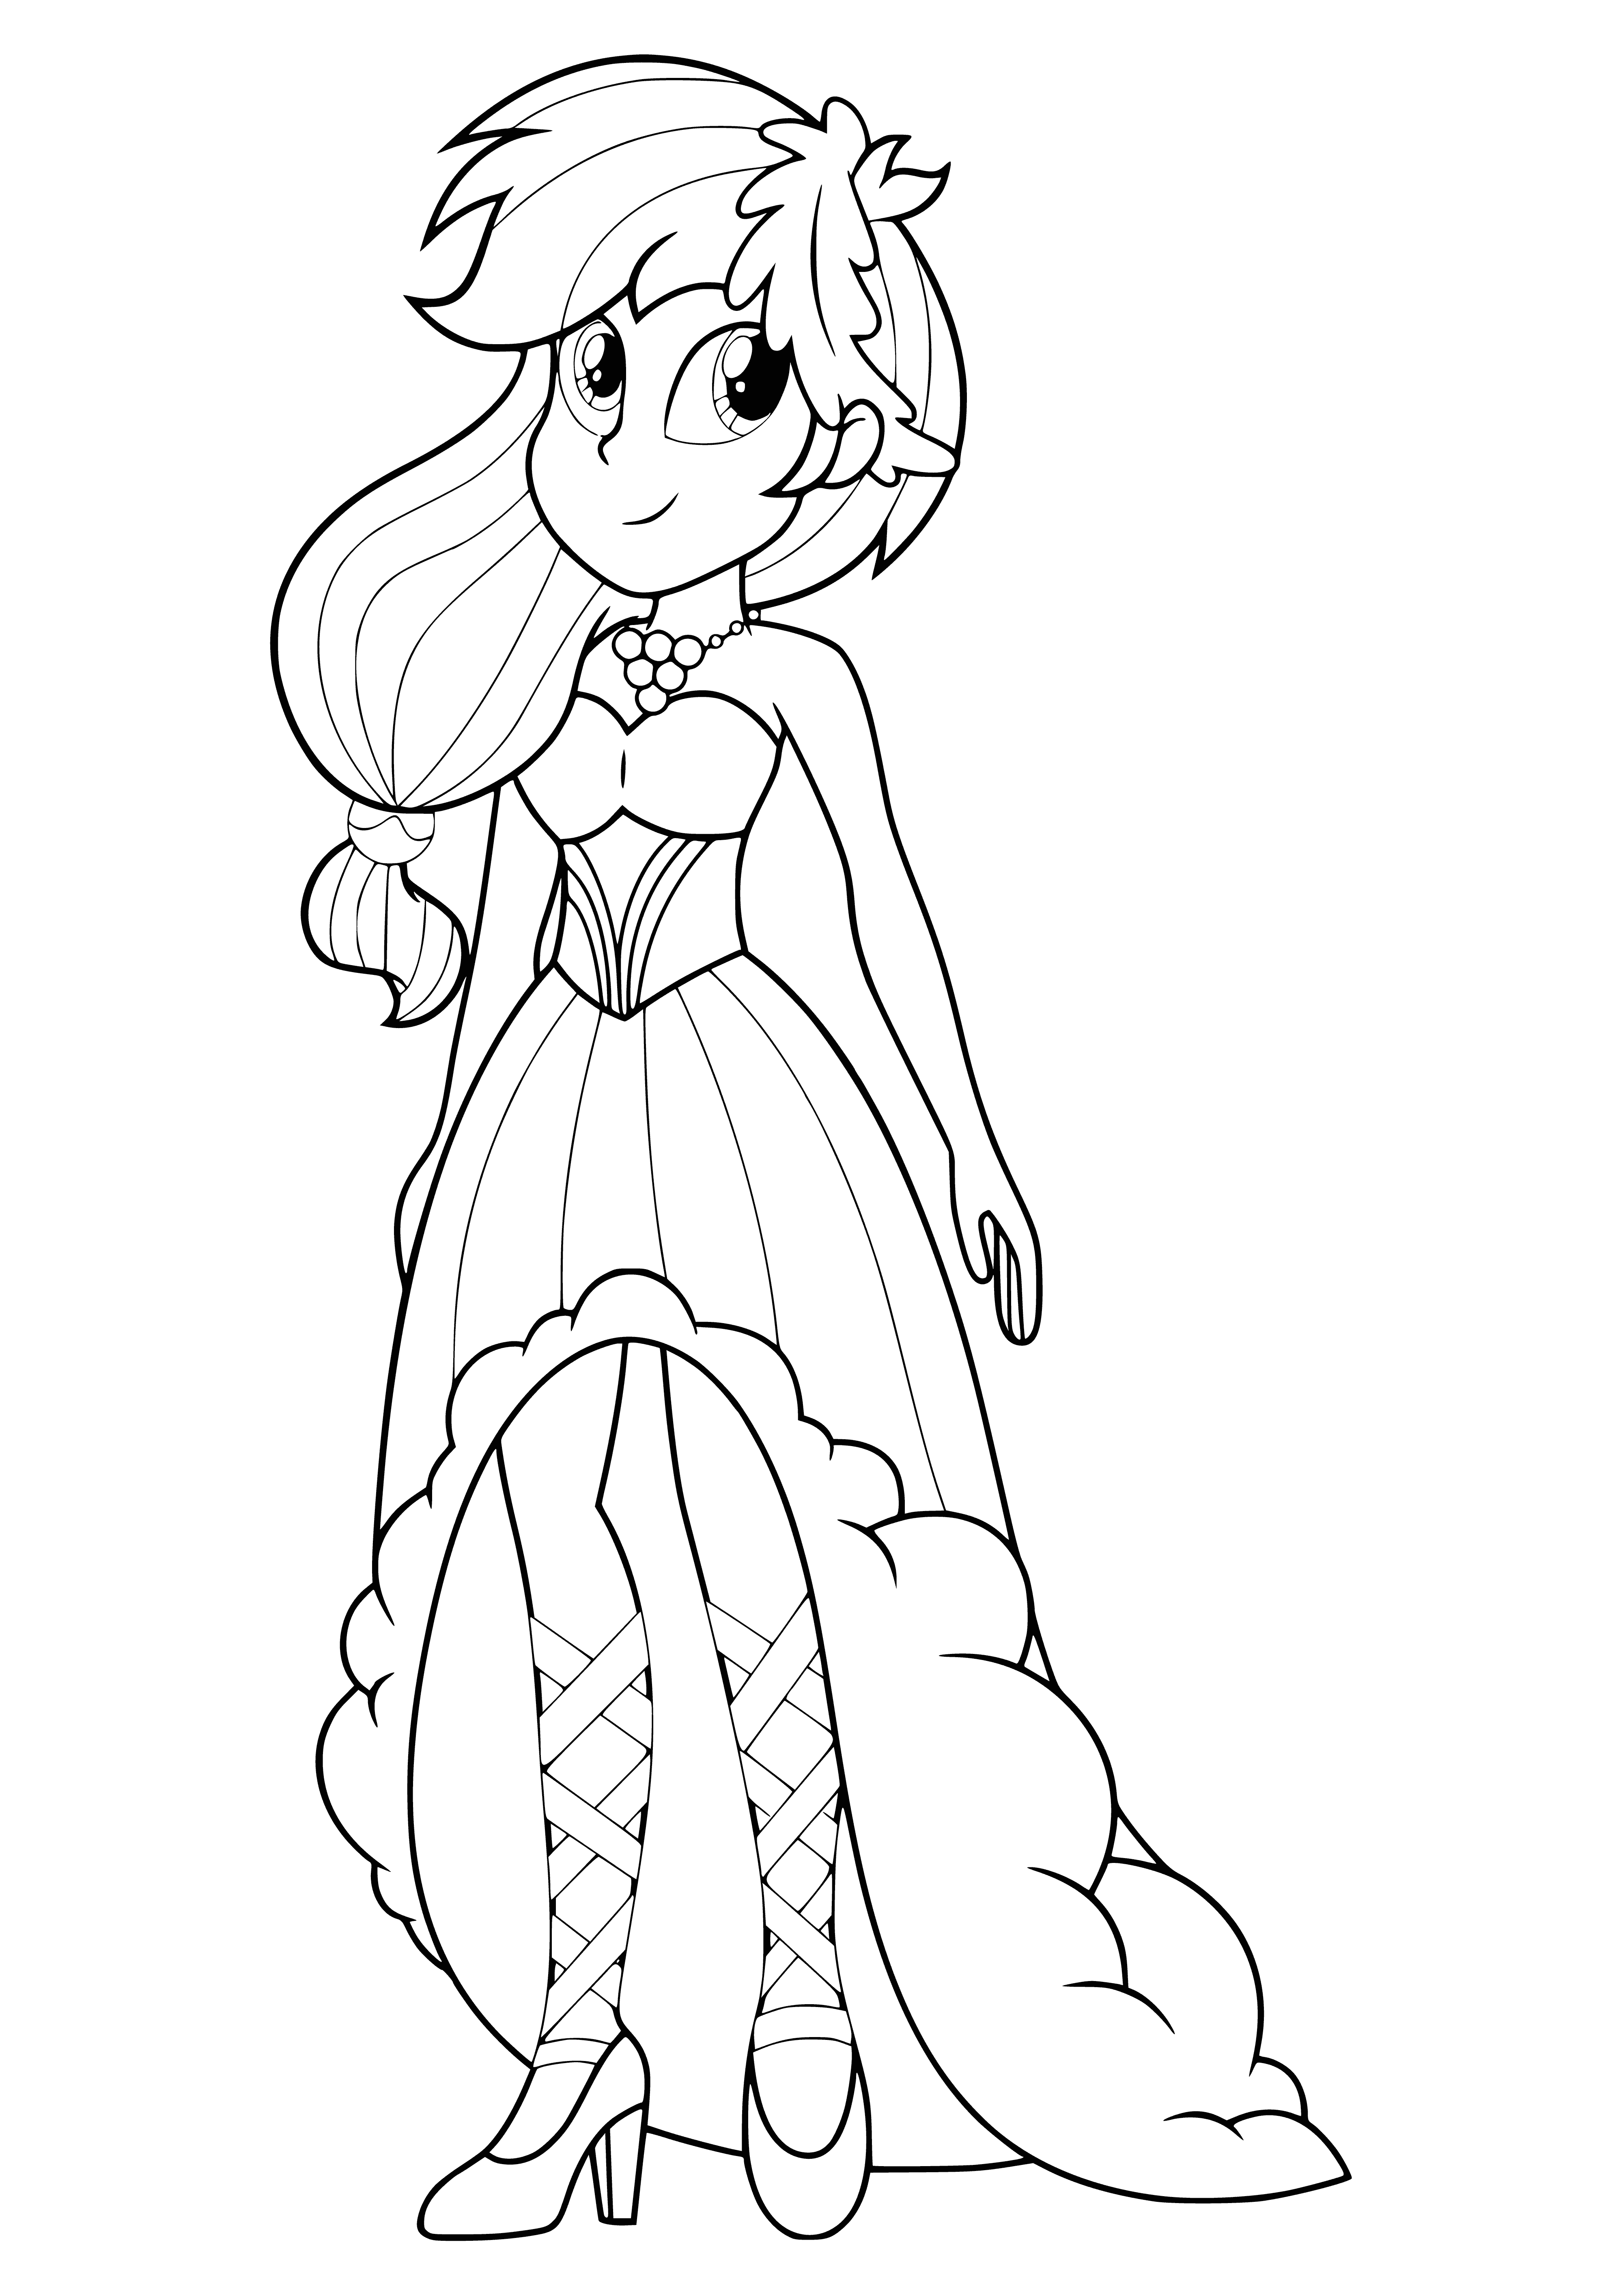 coloring page: She's ready to take on the world in a cape, rainbow-mane, and full of courage! #GirlPower